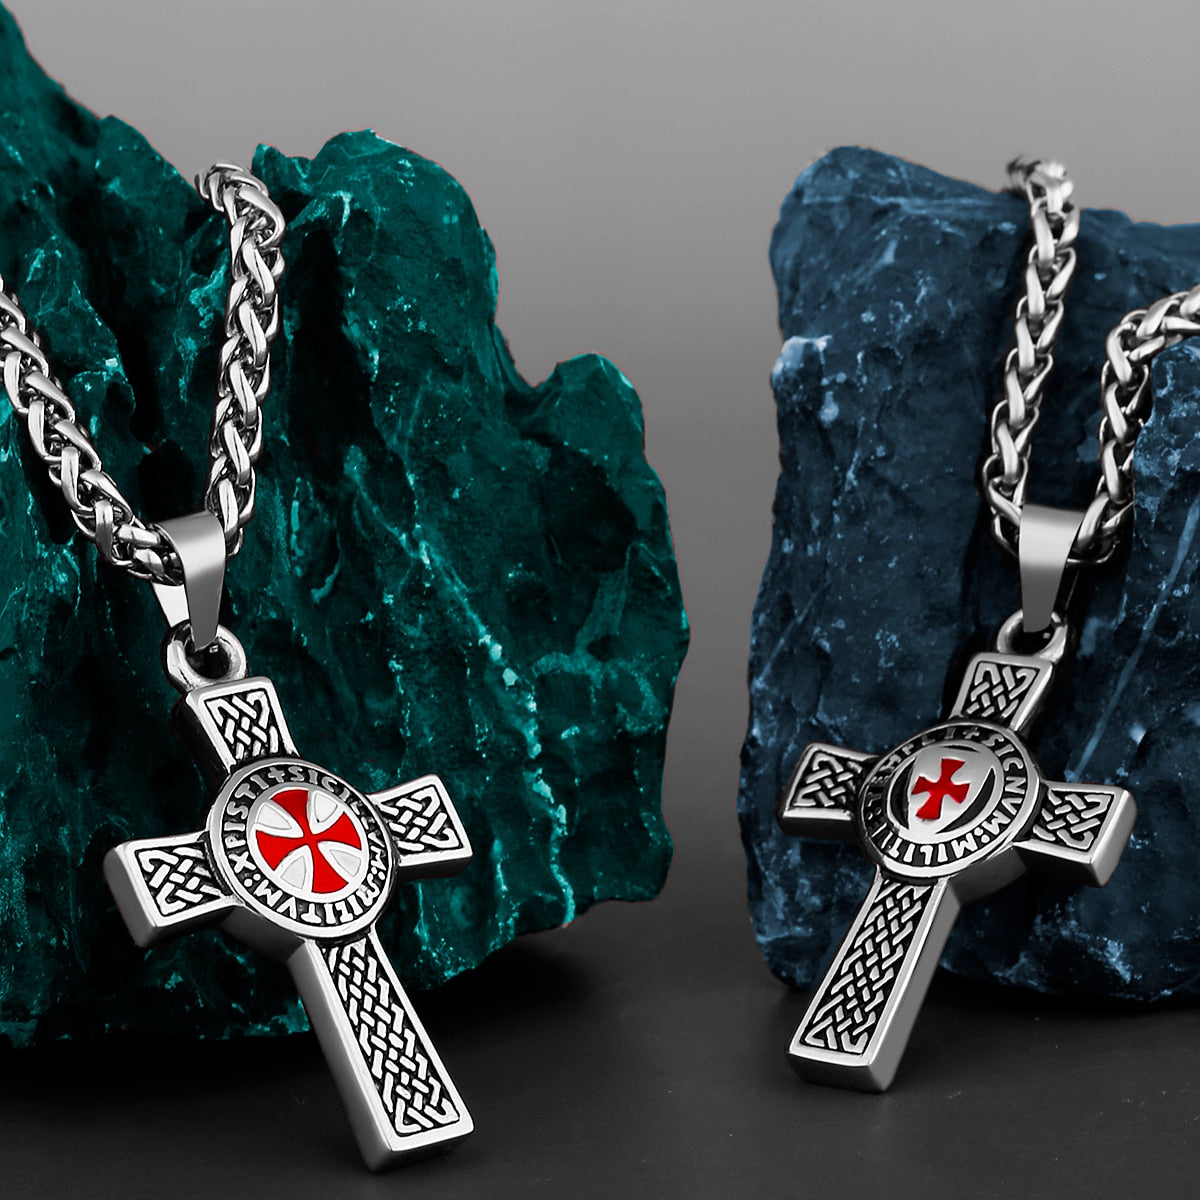 Cross Shield Drop Red and White Retro Necklace